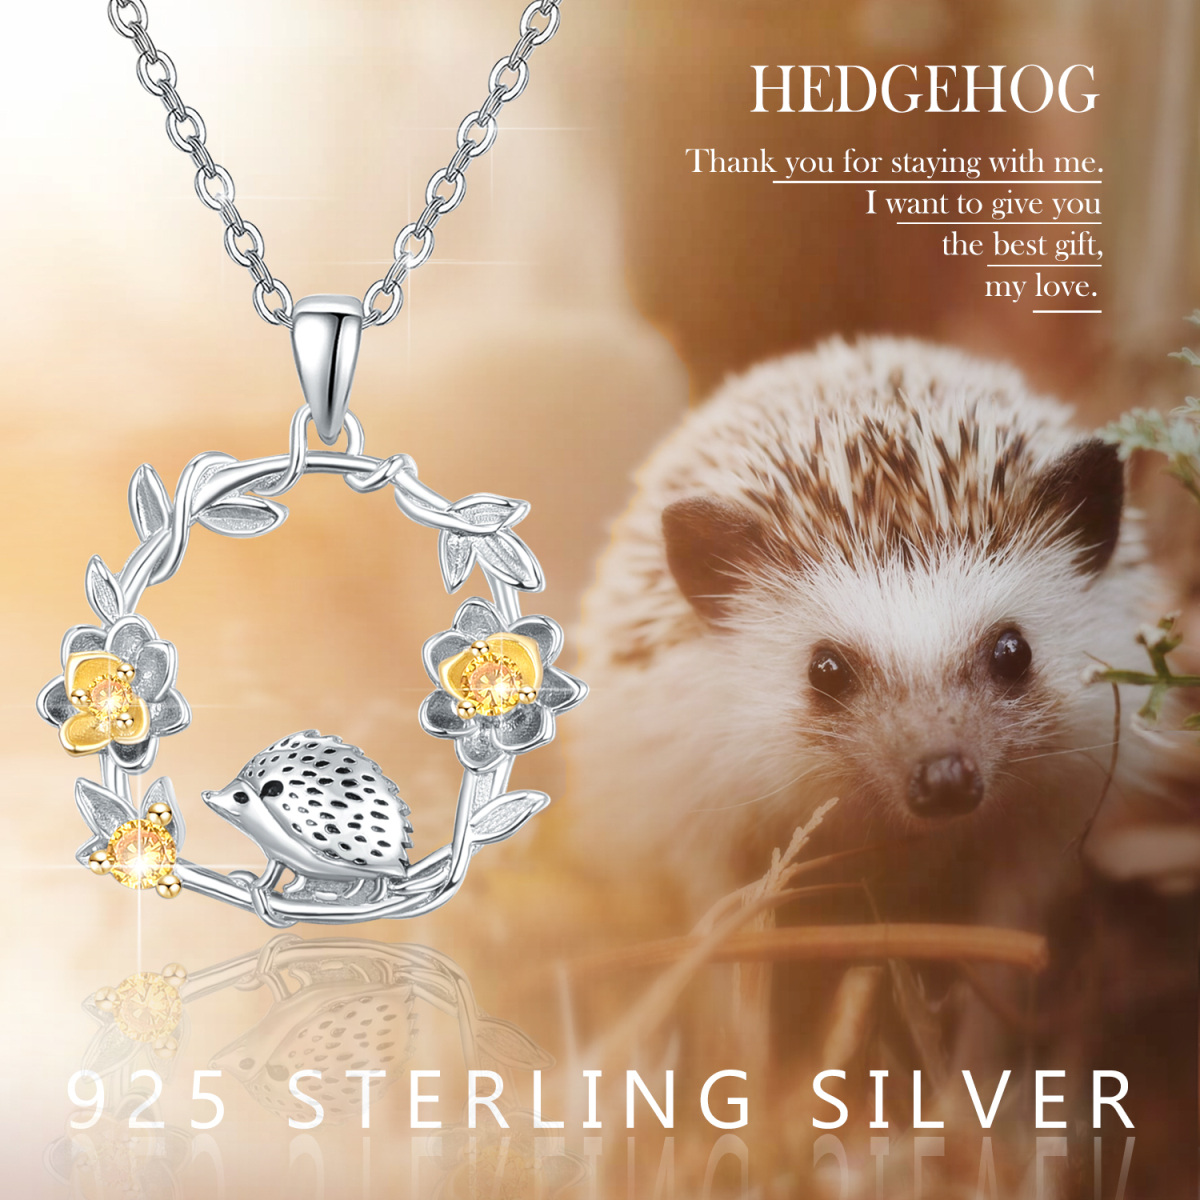 Sterling Silver Hedgehog with Flower Pendant Necklace-6